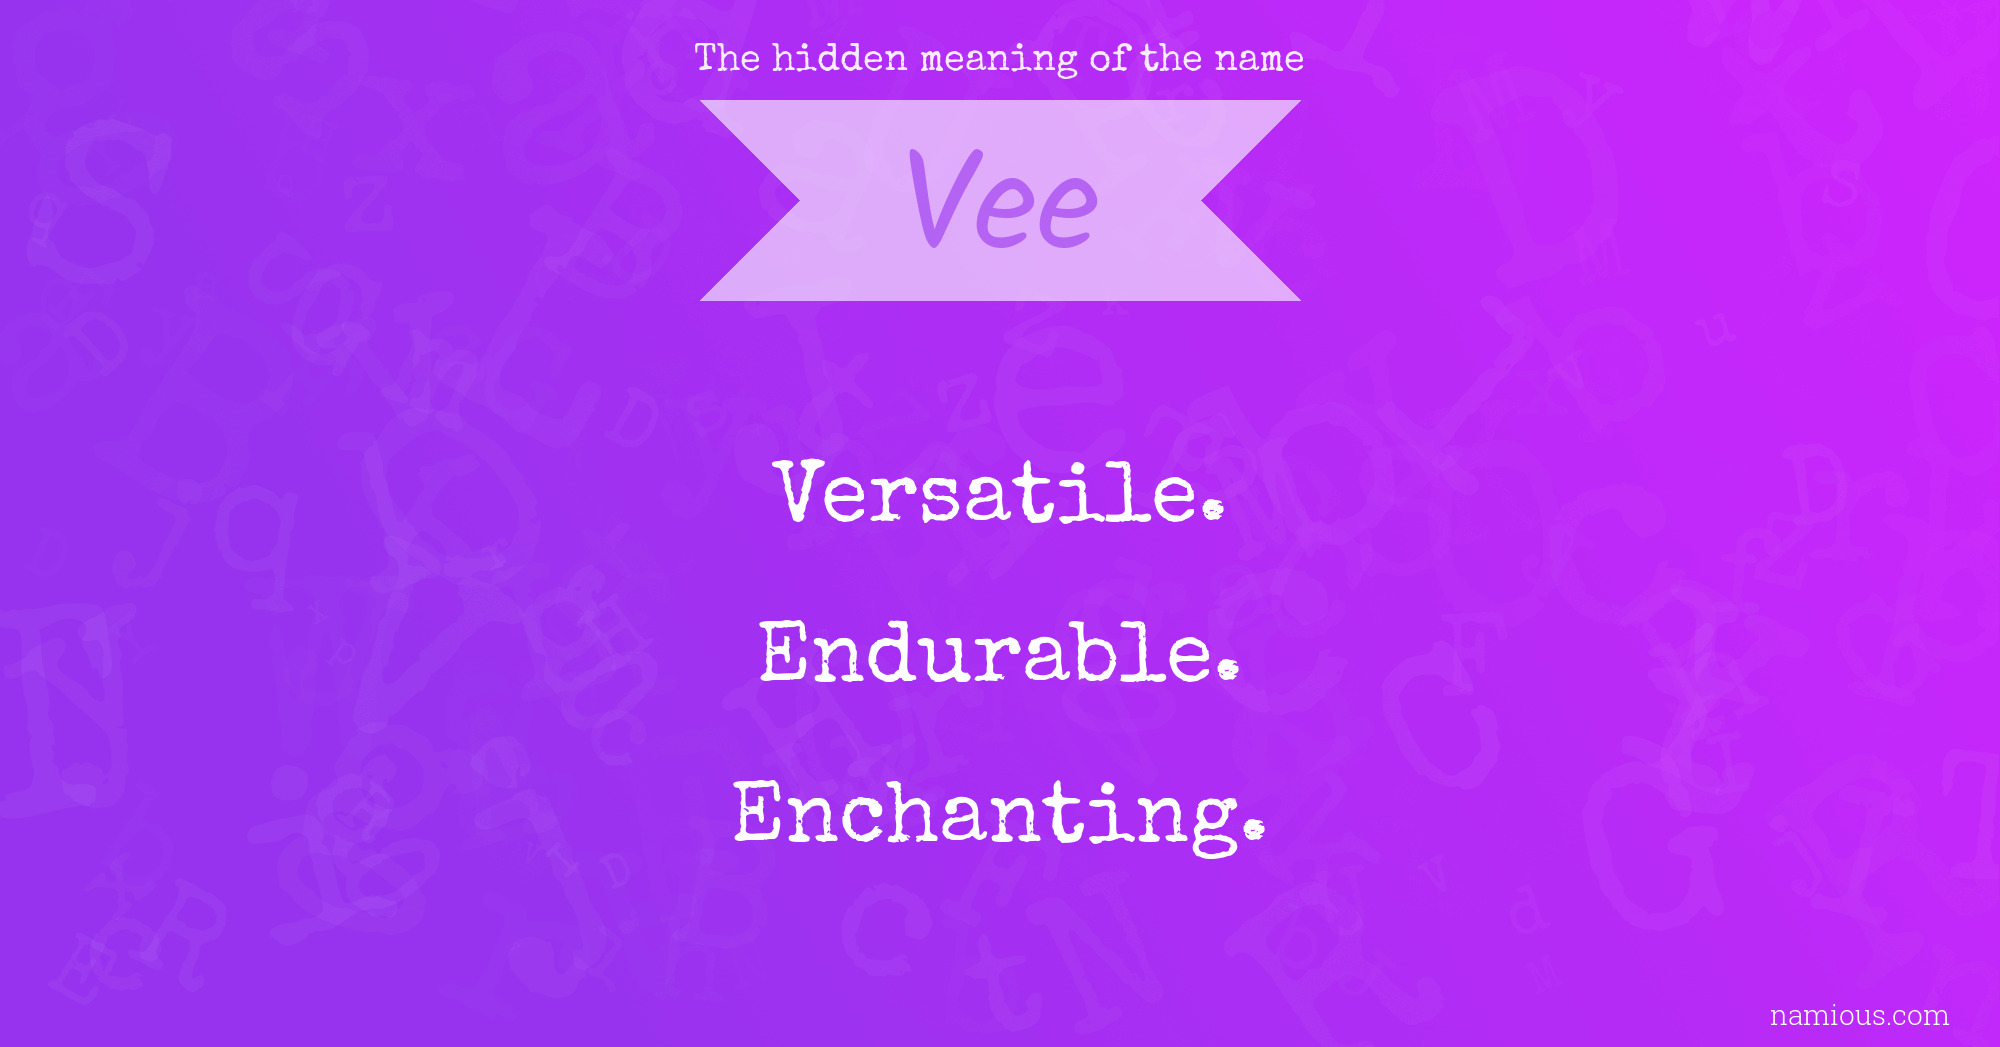 The hidden meaning of the name Vee